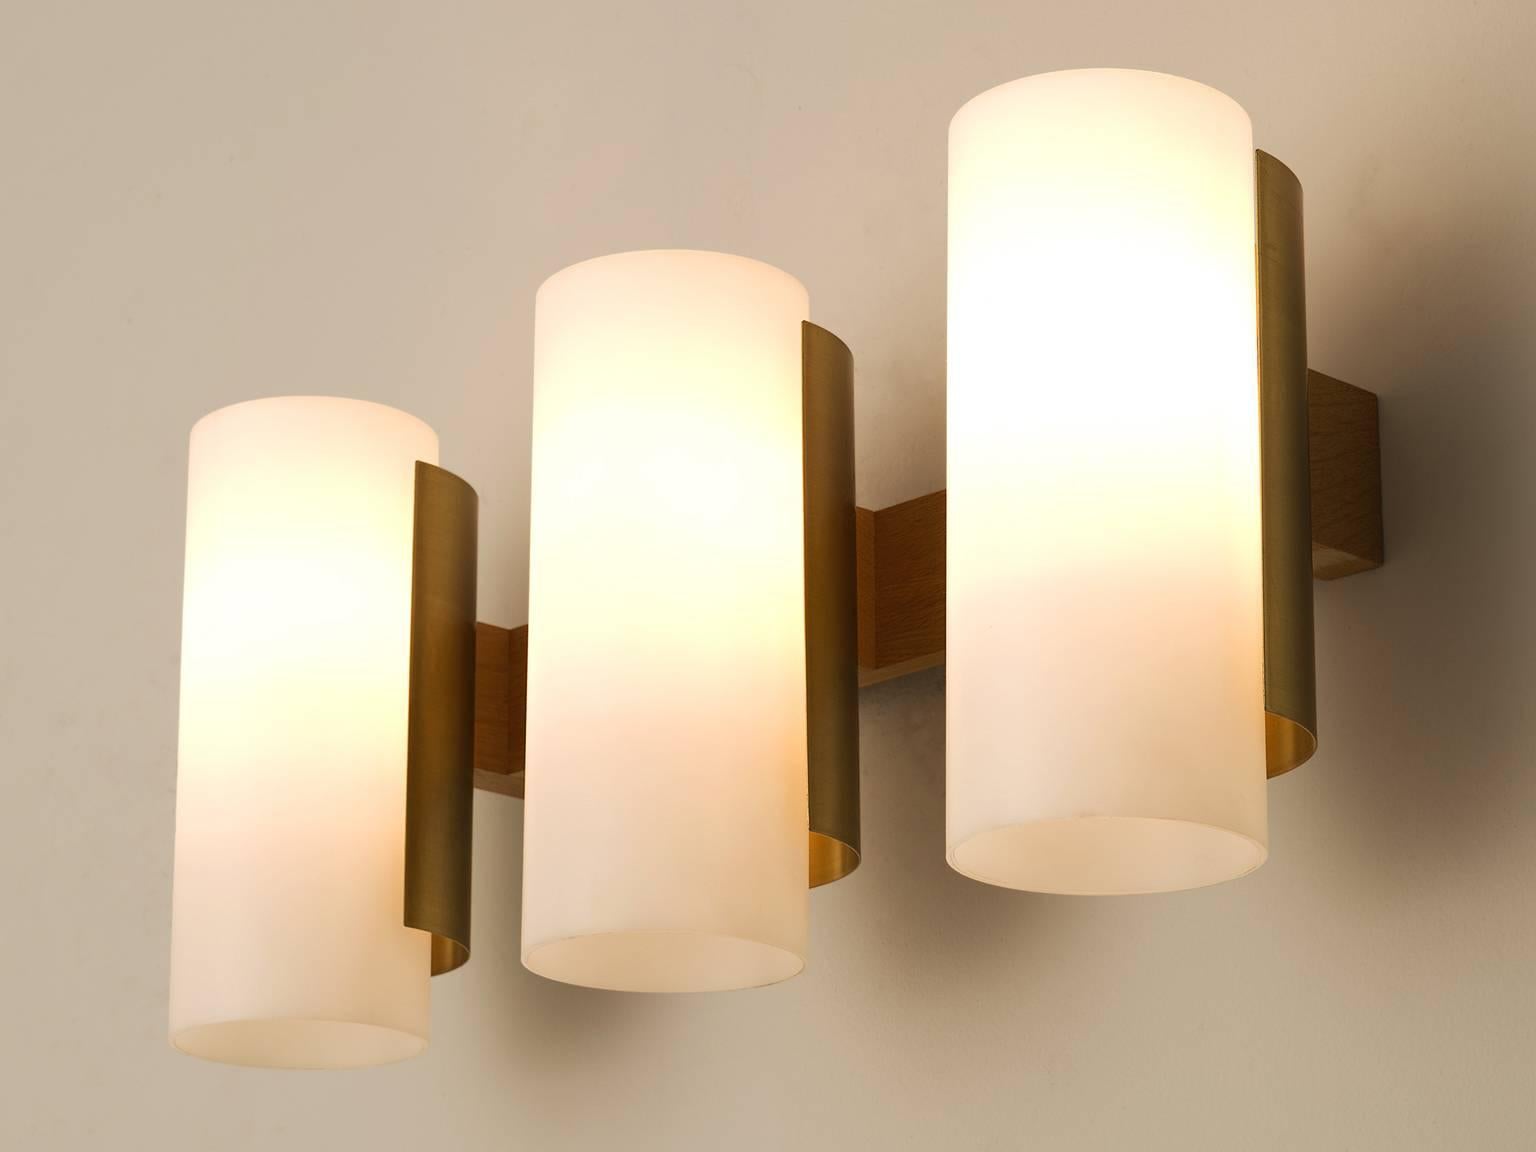 Sten Carlquis, set of eight wall lights, in brass wood and polyester, Sweden, 1960s. 

Set of eight large wall lights. Each light consist three cylindrical white shades, which are hold by a brass frame. The wall fixture is made out of wood. The